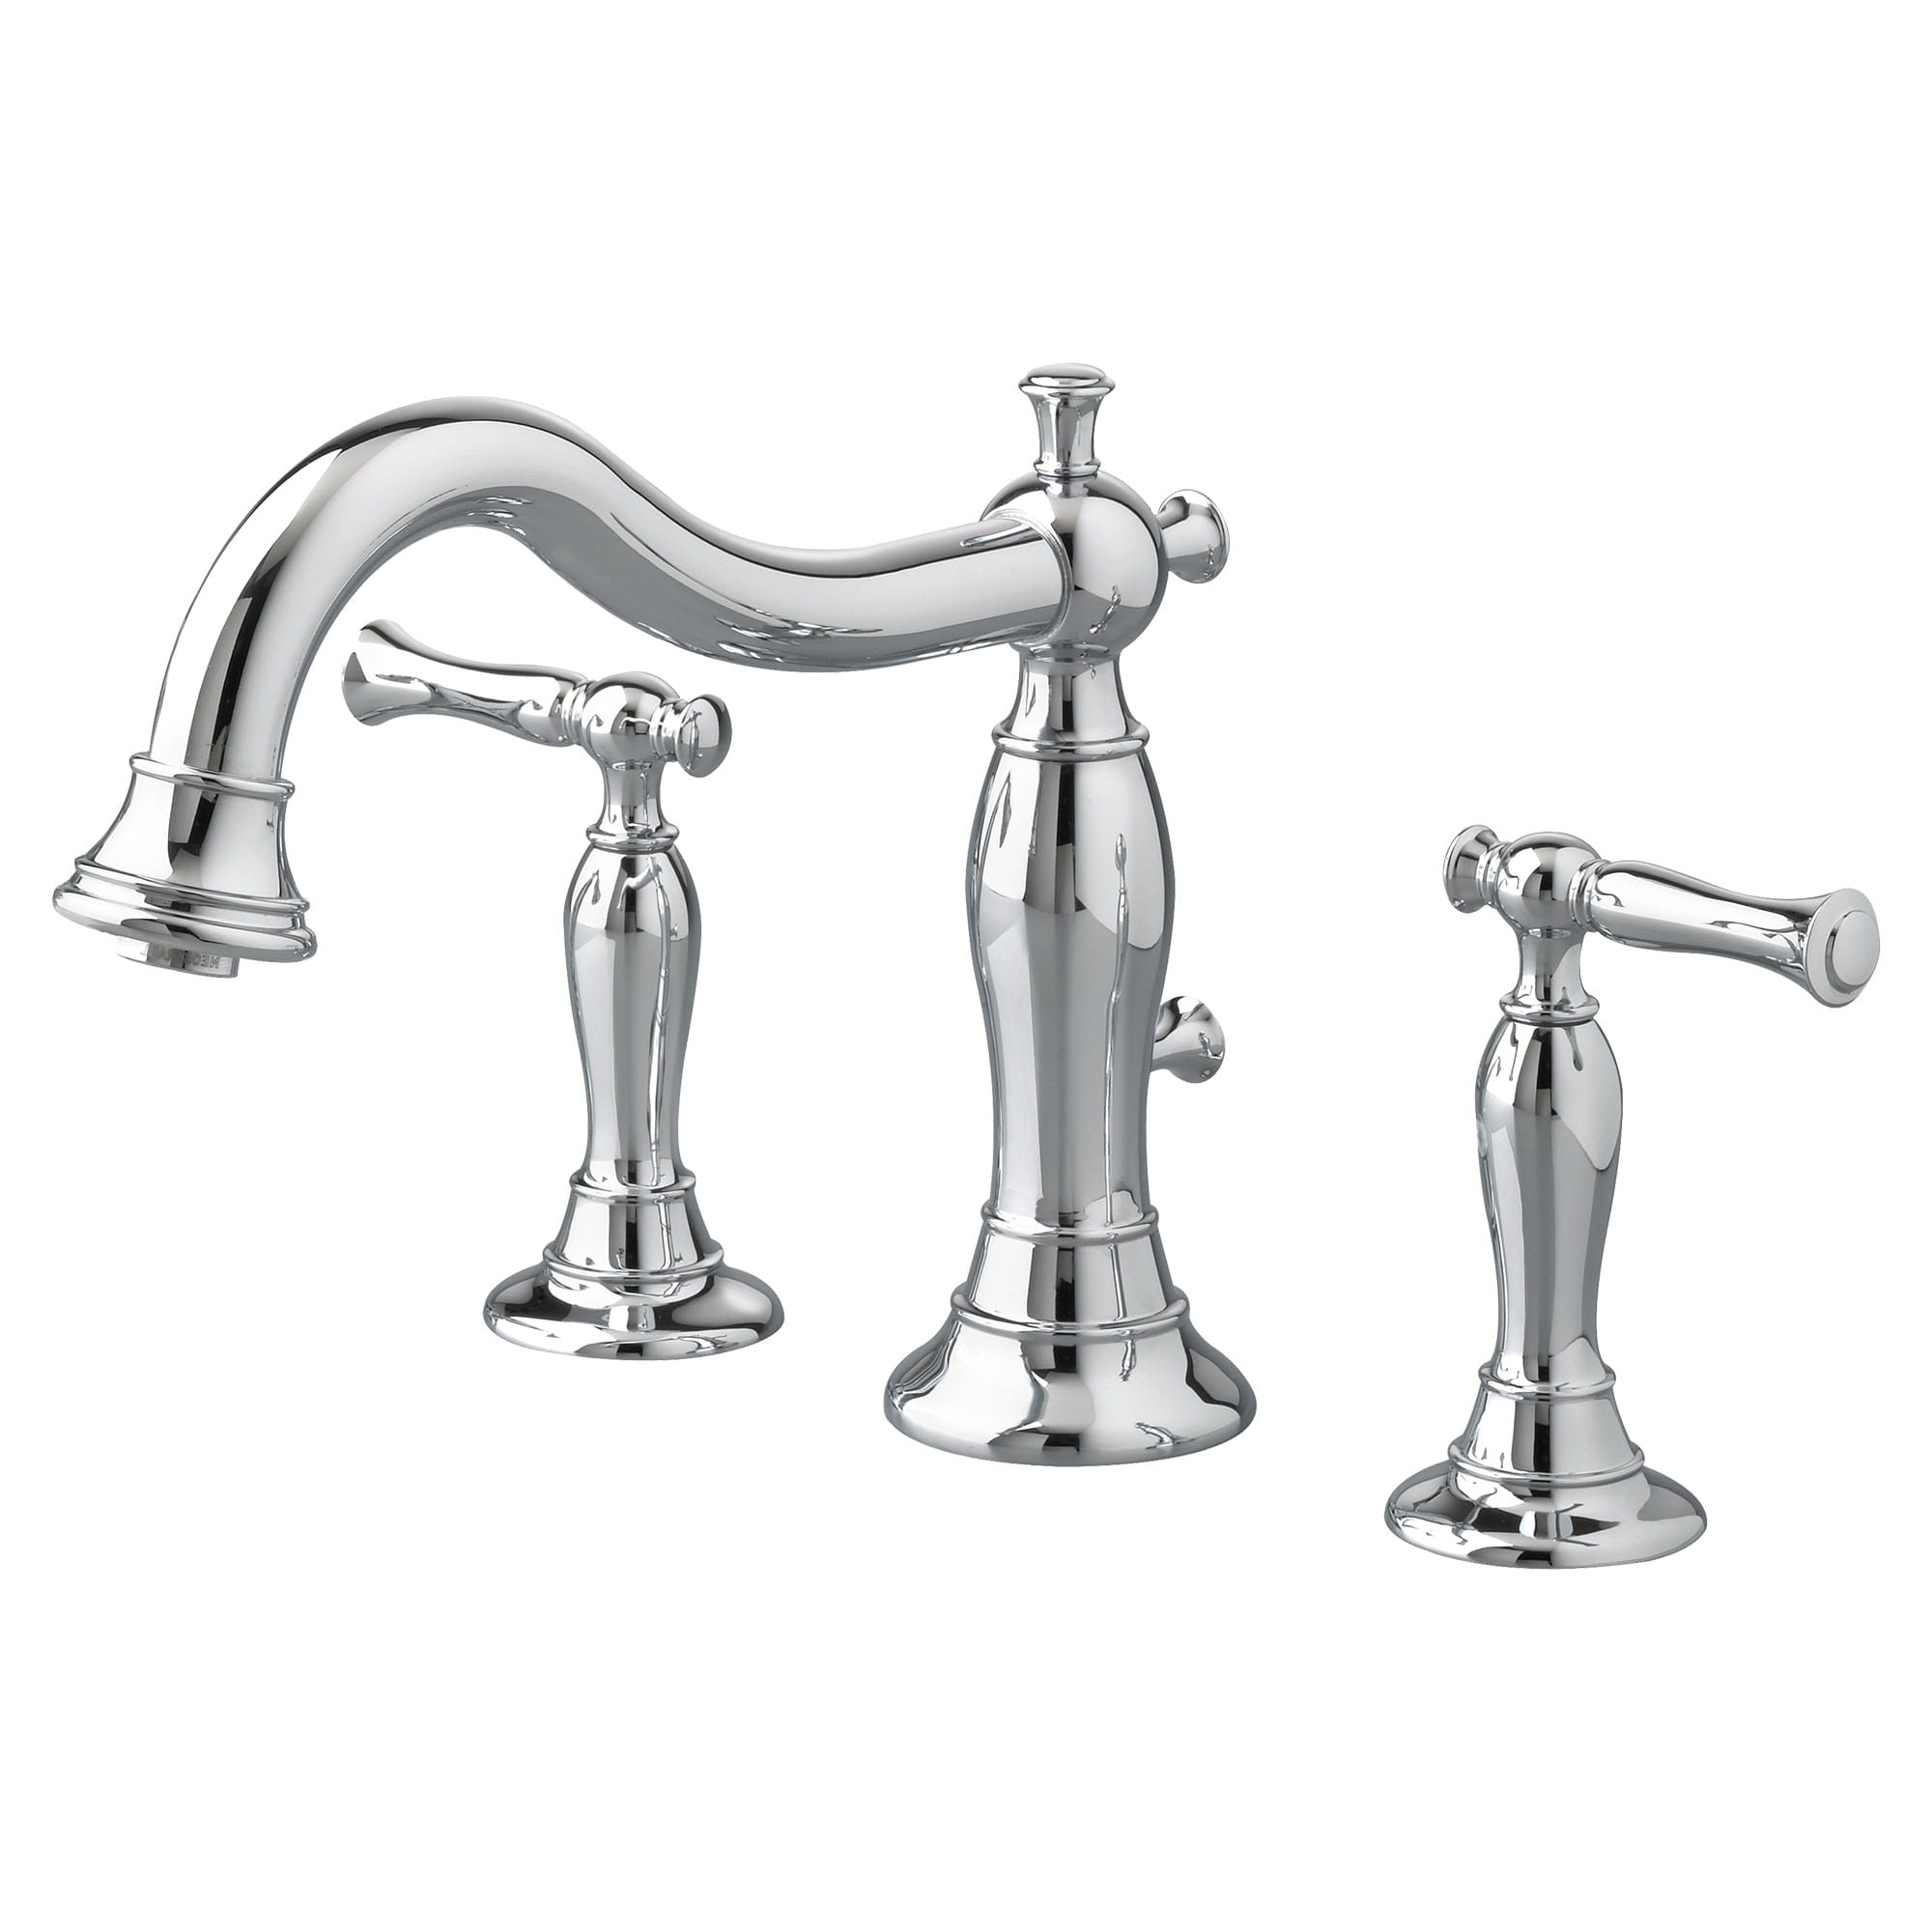 Quentin Bathtub Faucet for Flash Rough in Valve with Lever Handles CHROME